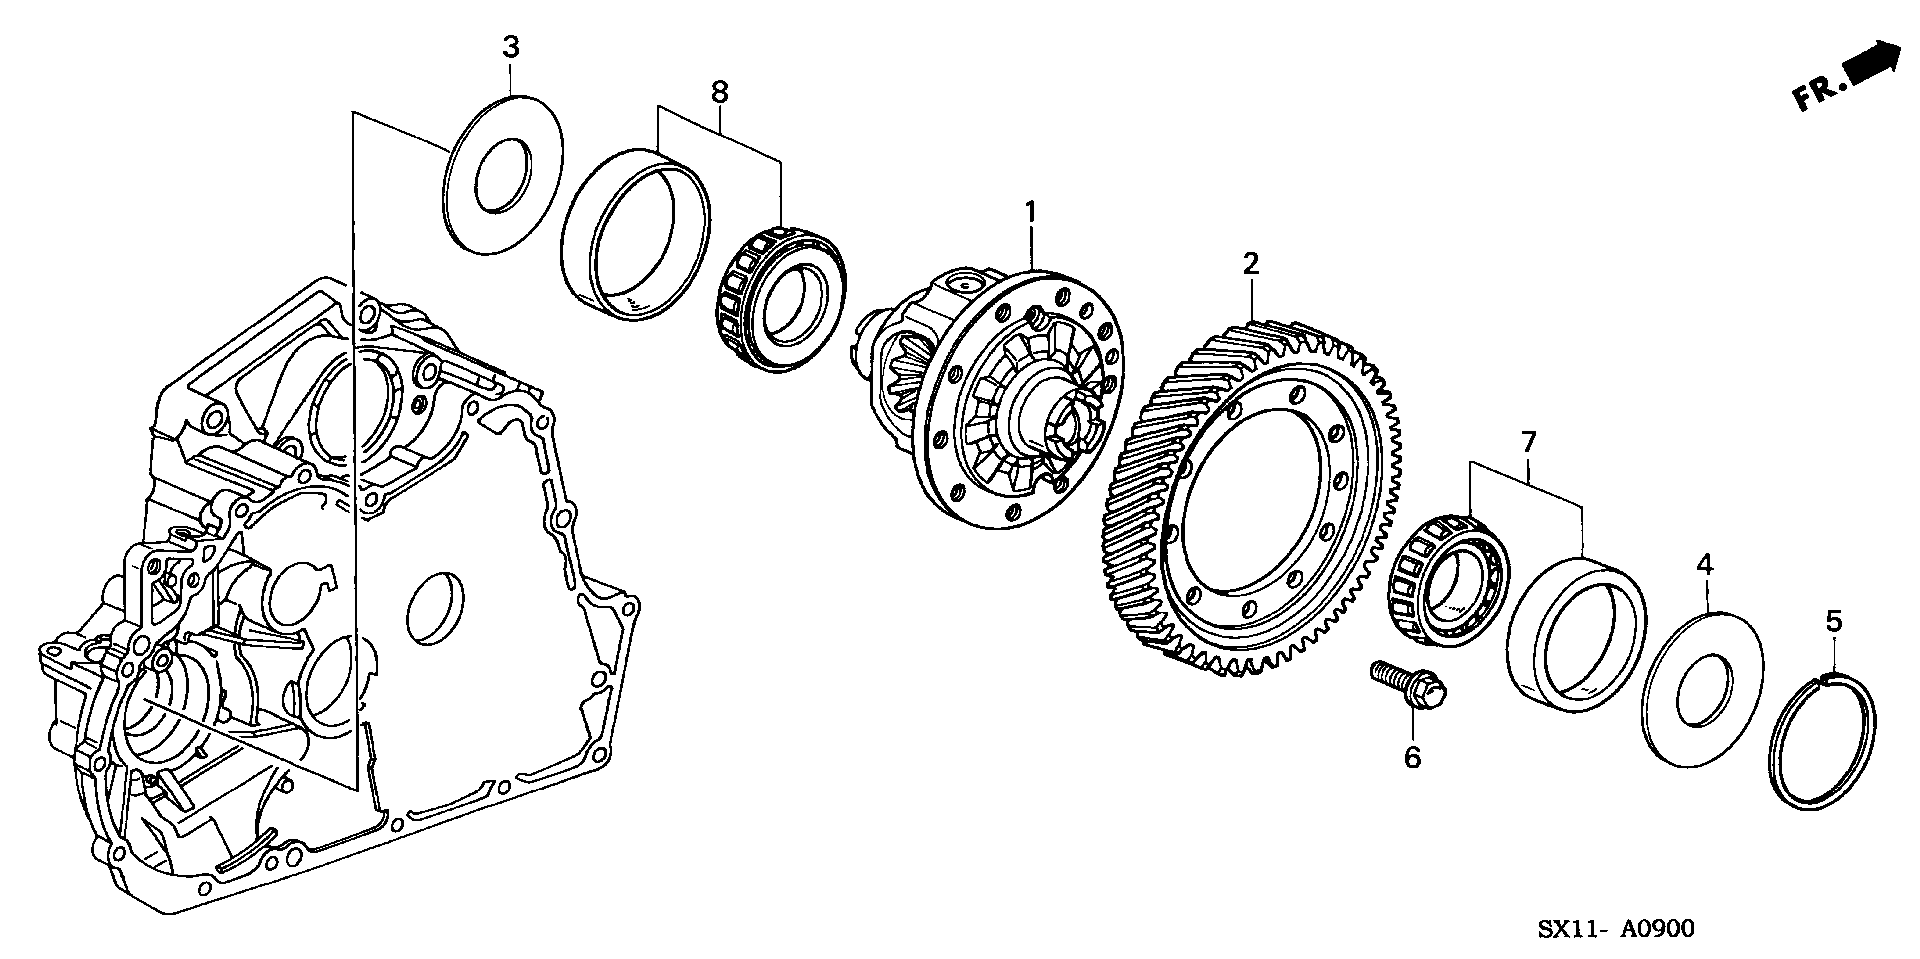 DIFFERENTIAL GEAR(2WD)